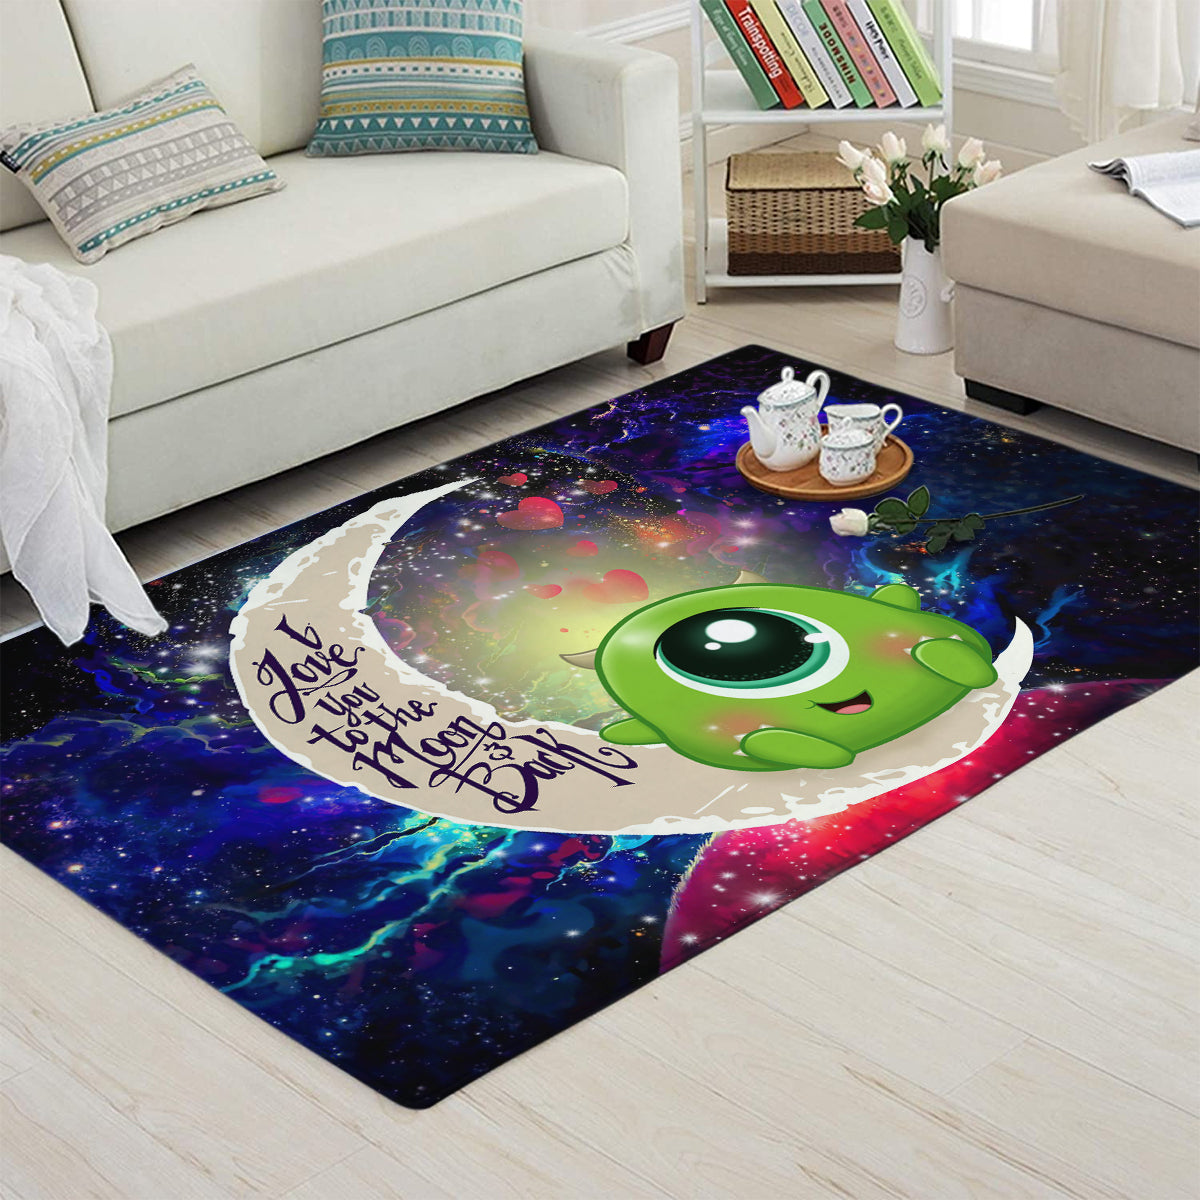 Cute Mike Monster Inc Love You To The Moon Galaxy Carpet Rug Home Room Decor